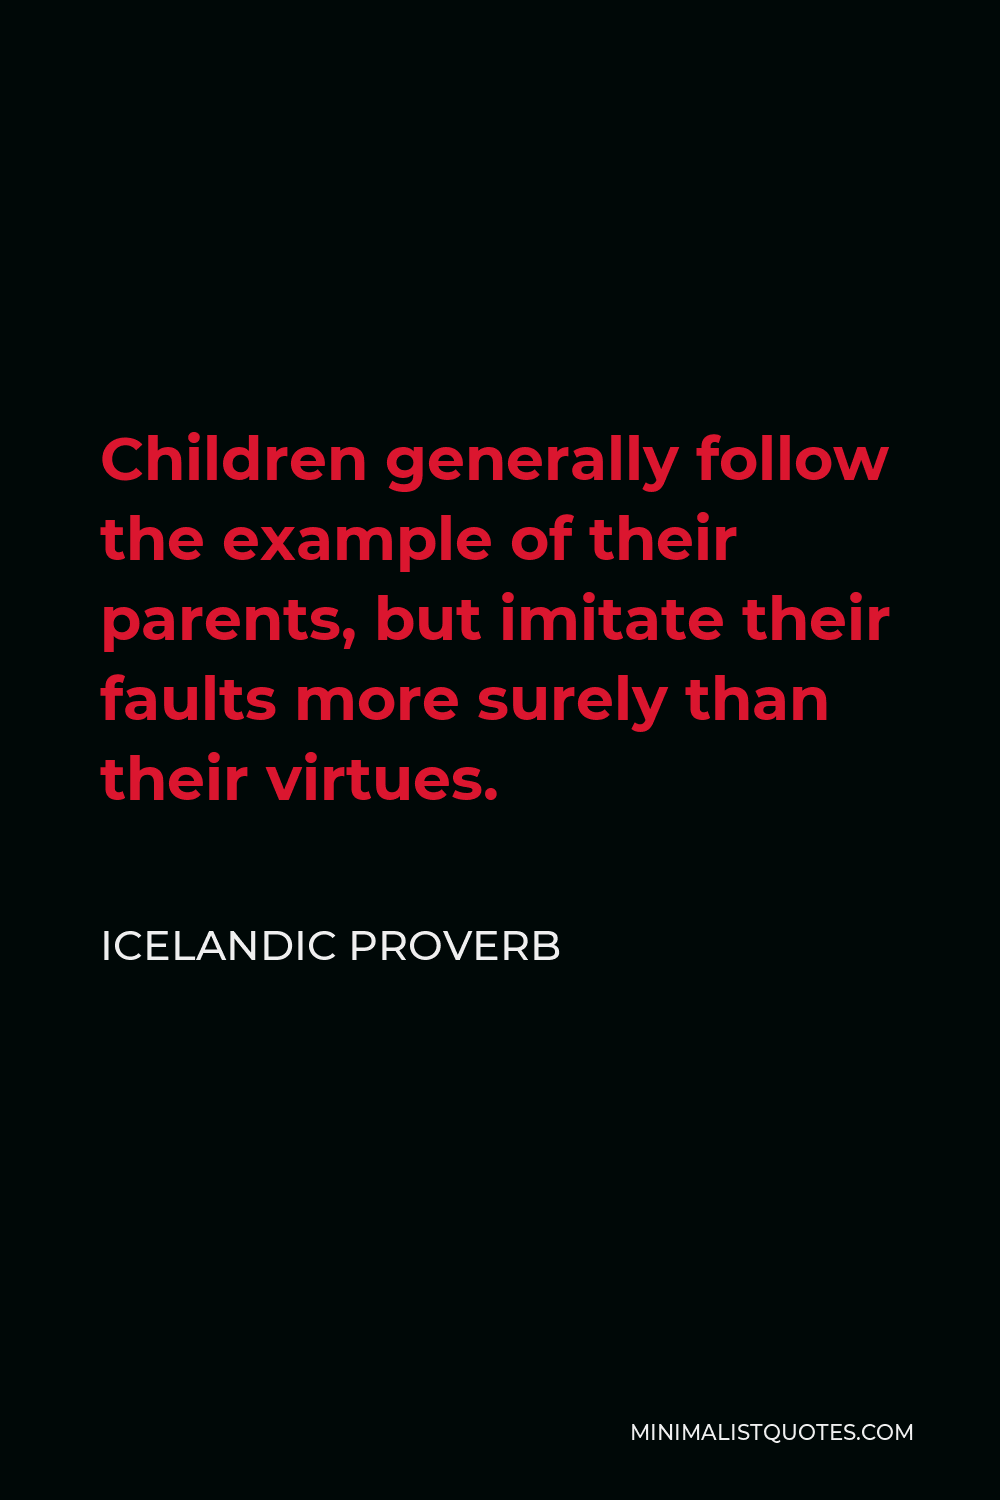 Icelandic Proverb Quote - Children generally follow the example of their parents, but imitate their faults more surely than their virtues.